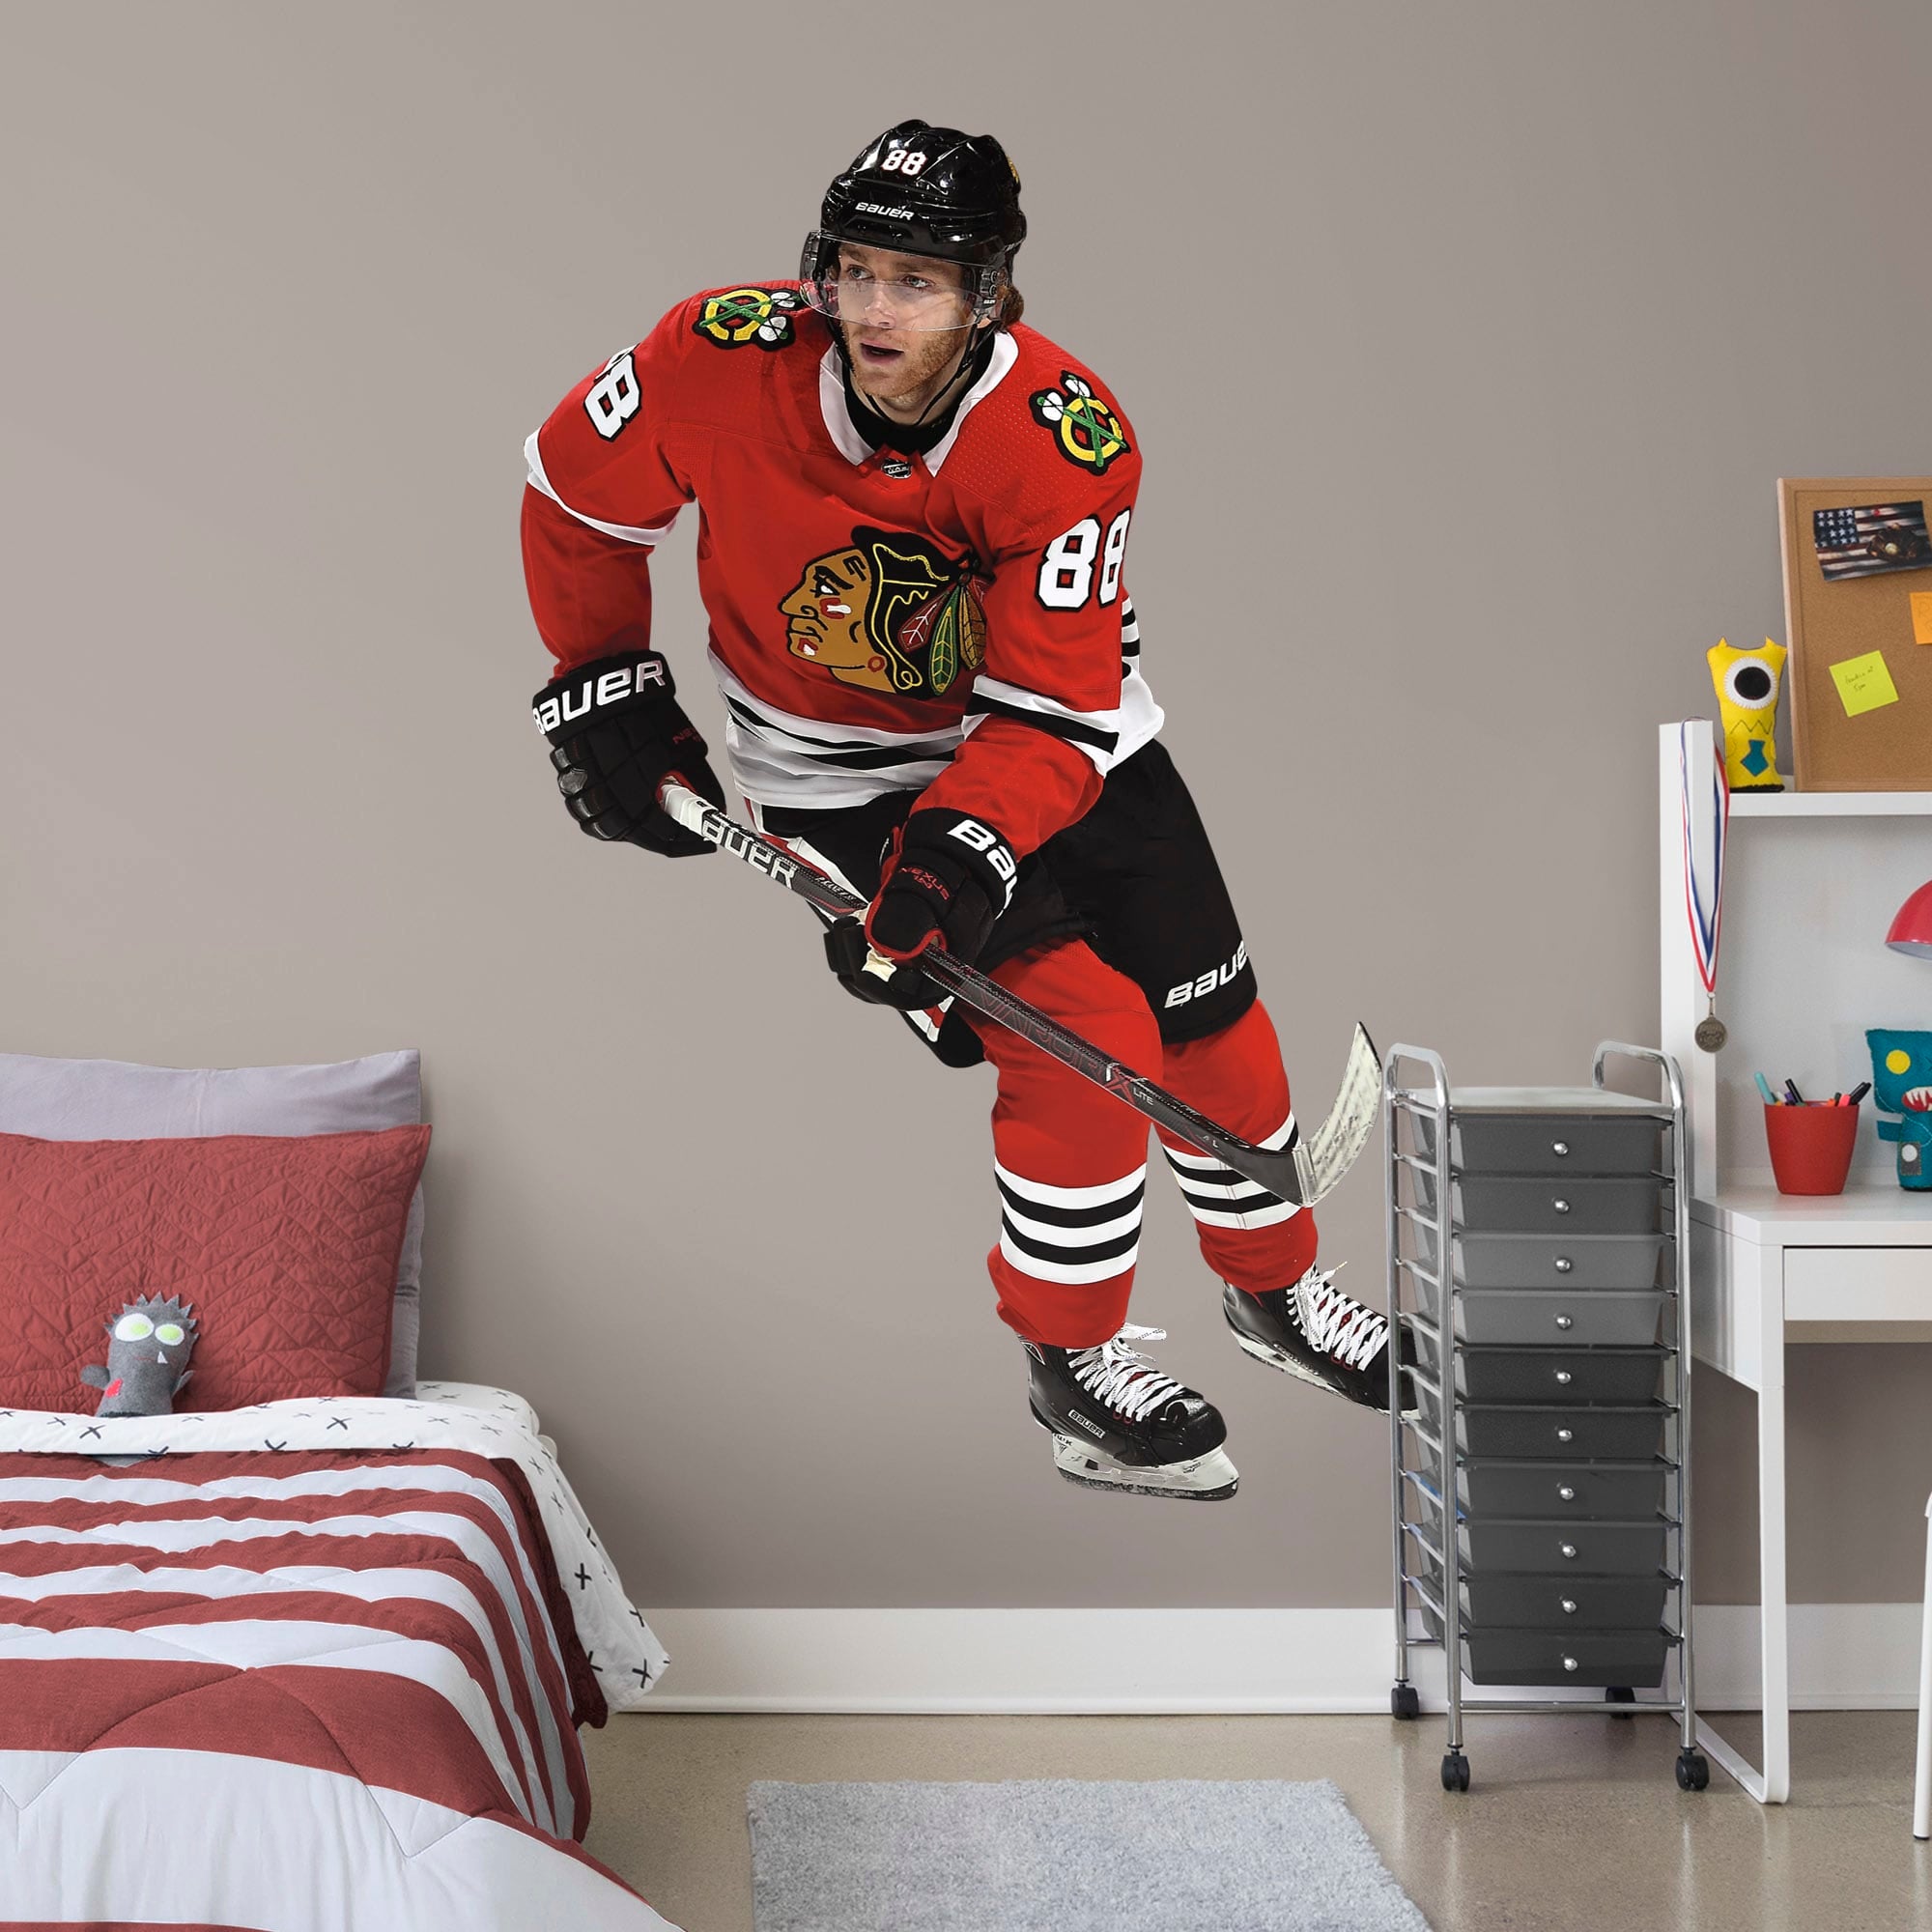 Patrick Kane for Chicago Blackhawks: Home - Officially Licensed NHL Removable Wall Decal Life-Size Athlete + 2 Decals (51"W x 76